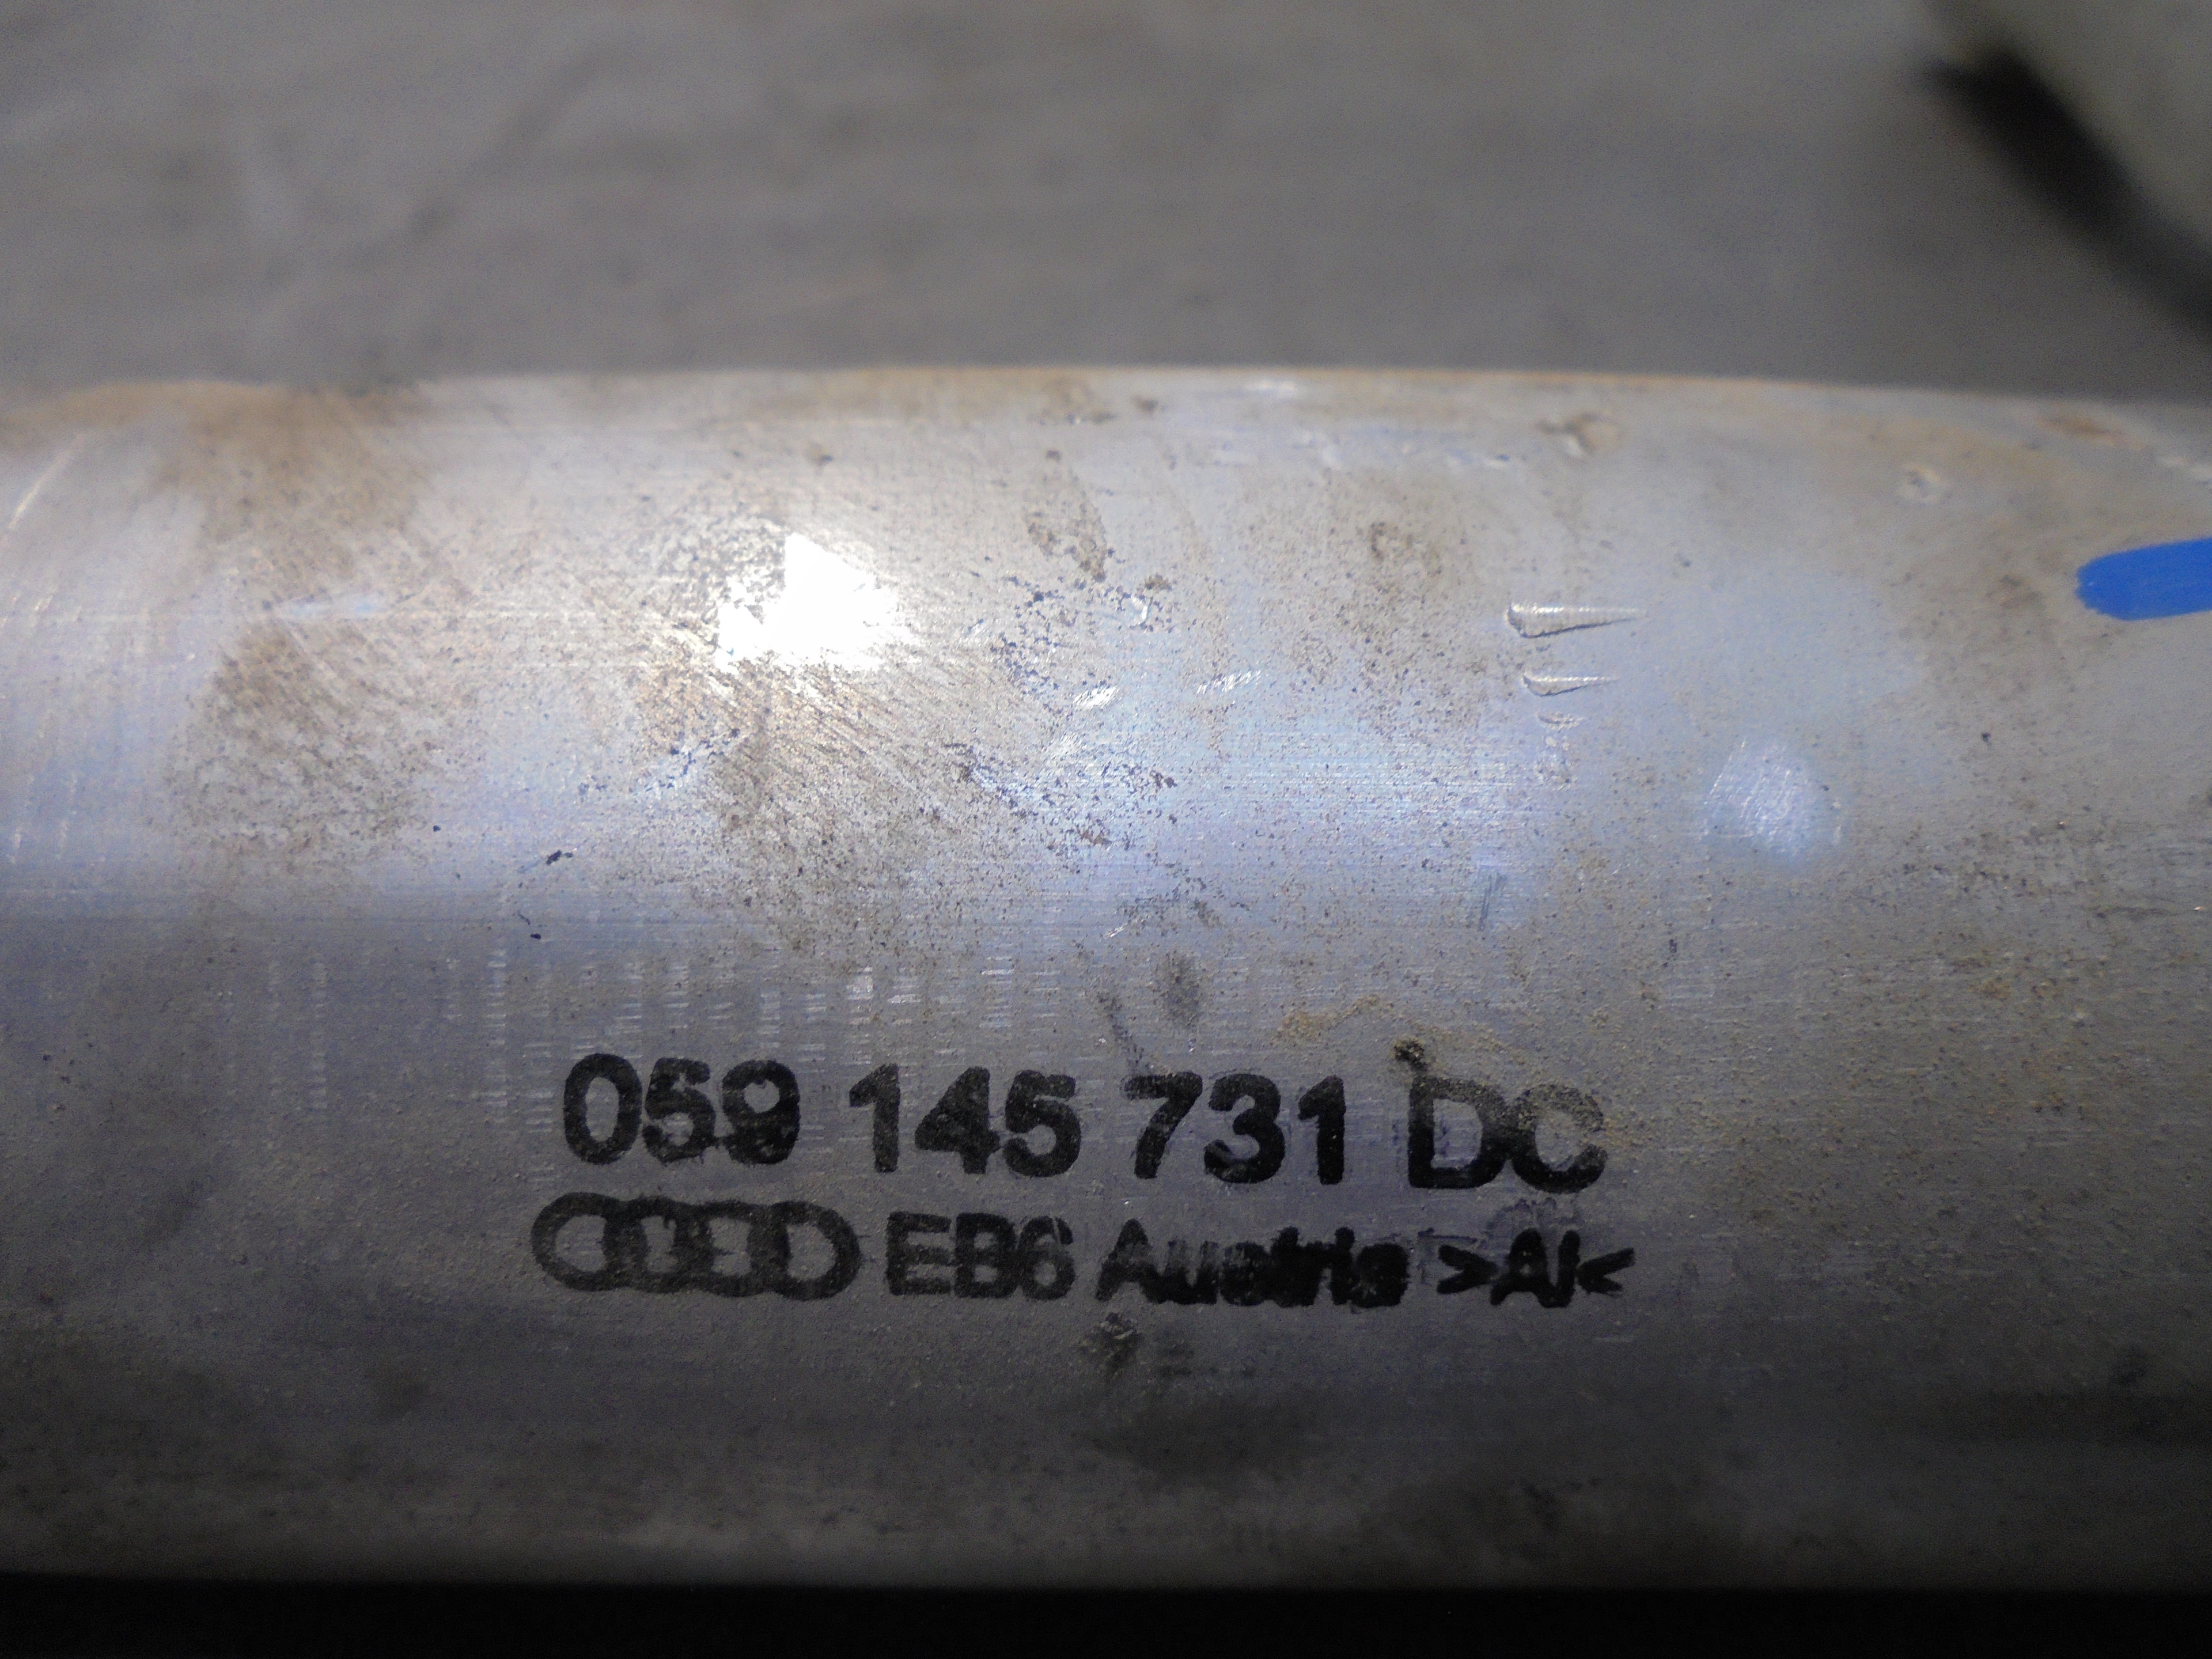 AUDI A6 allroad C7 (2012-2019) Other part 059145731 25061435